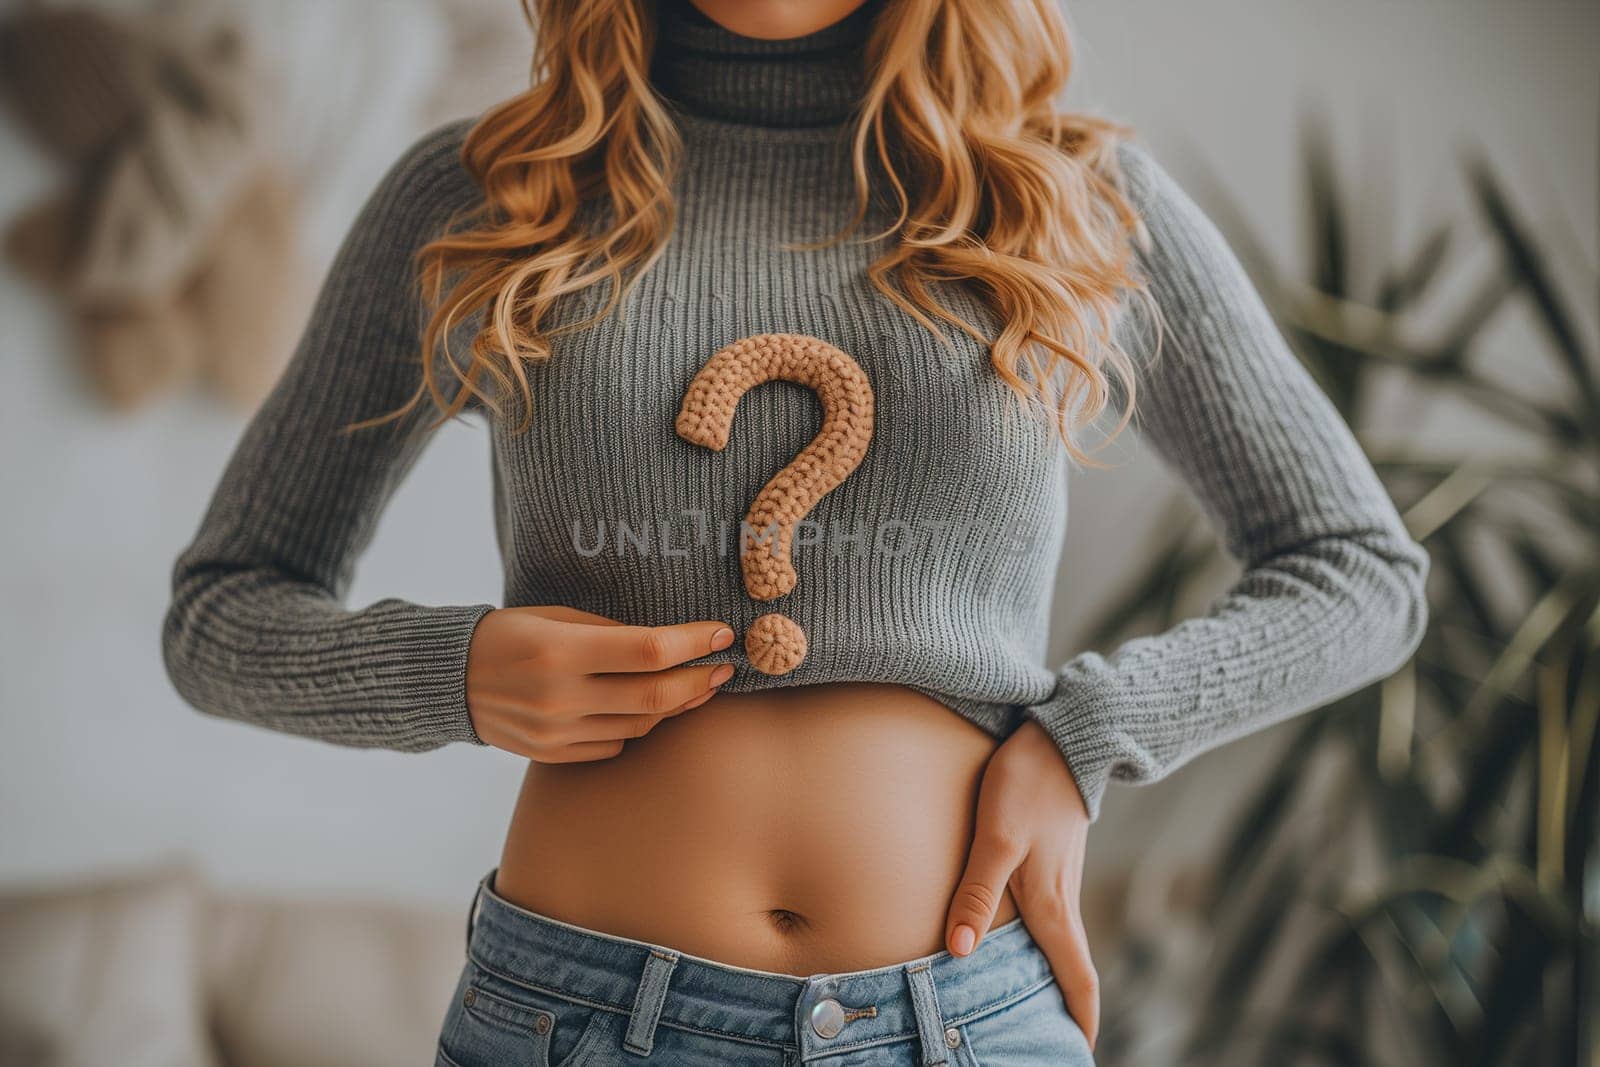 Woman holding question mark over her abdomen.